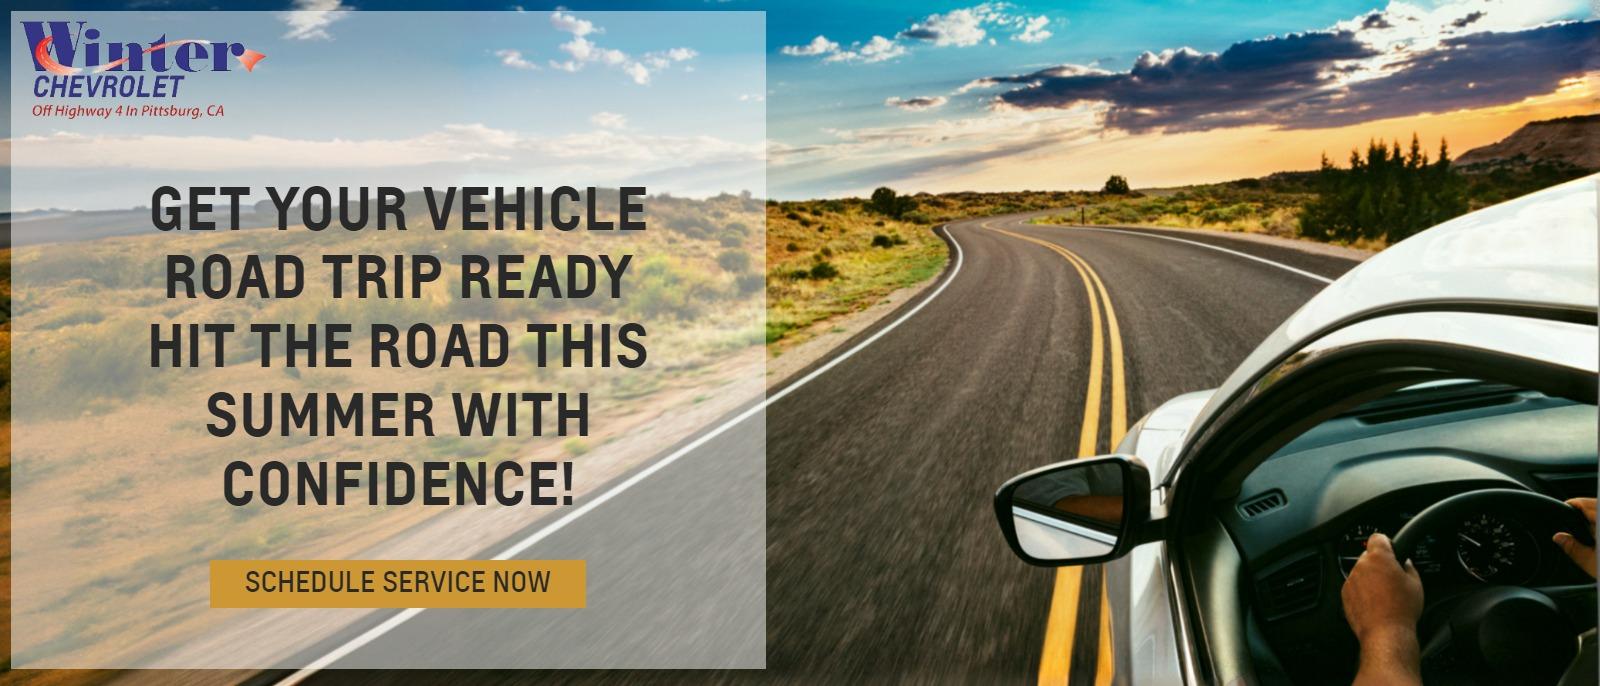 Get Your Vehicle Road Trip Read
Hit the road this summer with confidence!